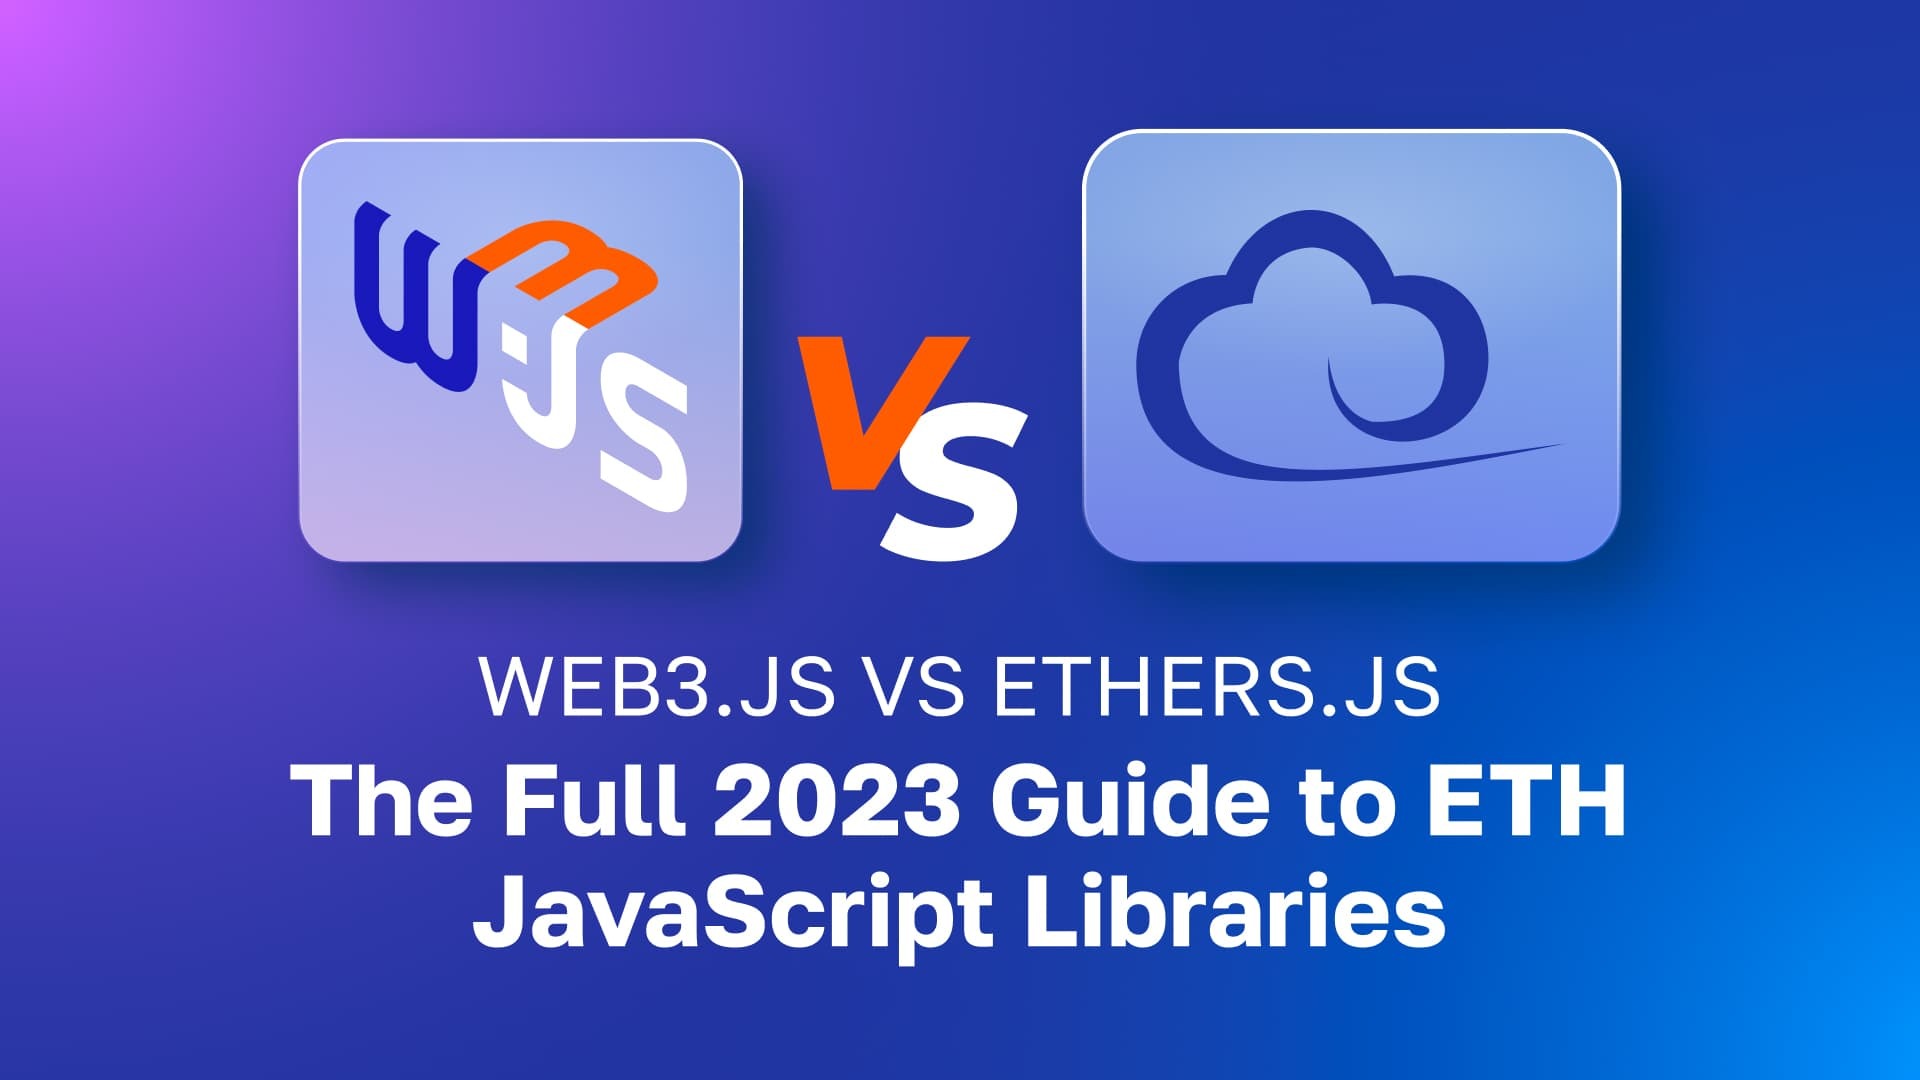 Comparing Web3.js vs Ethers.js - The Full 2023 Guide to ETH JavaScript Libraries